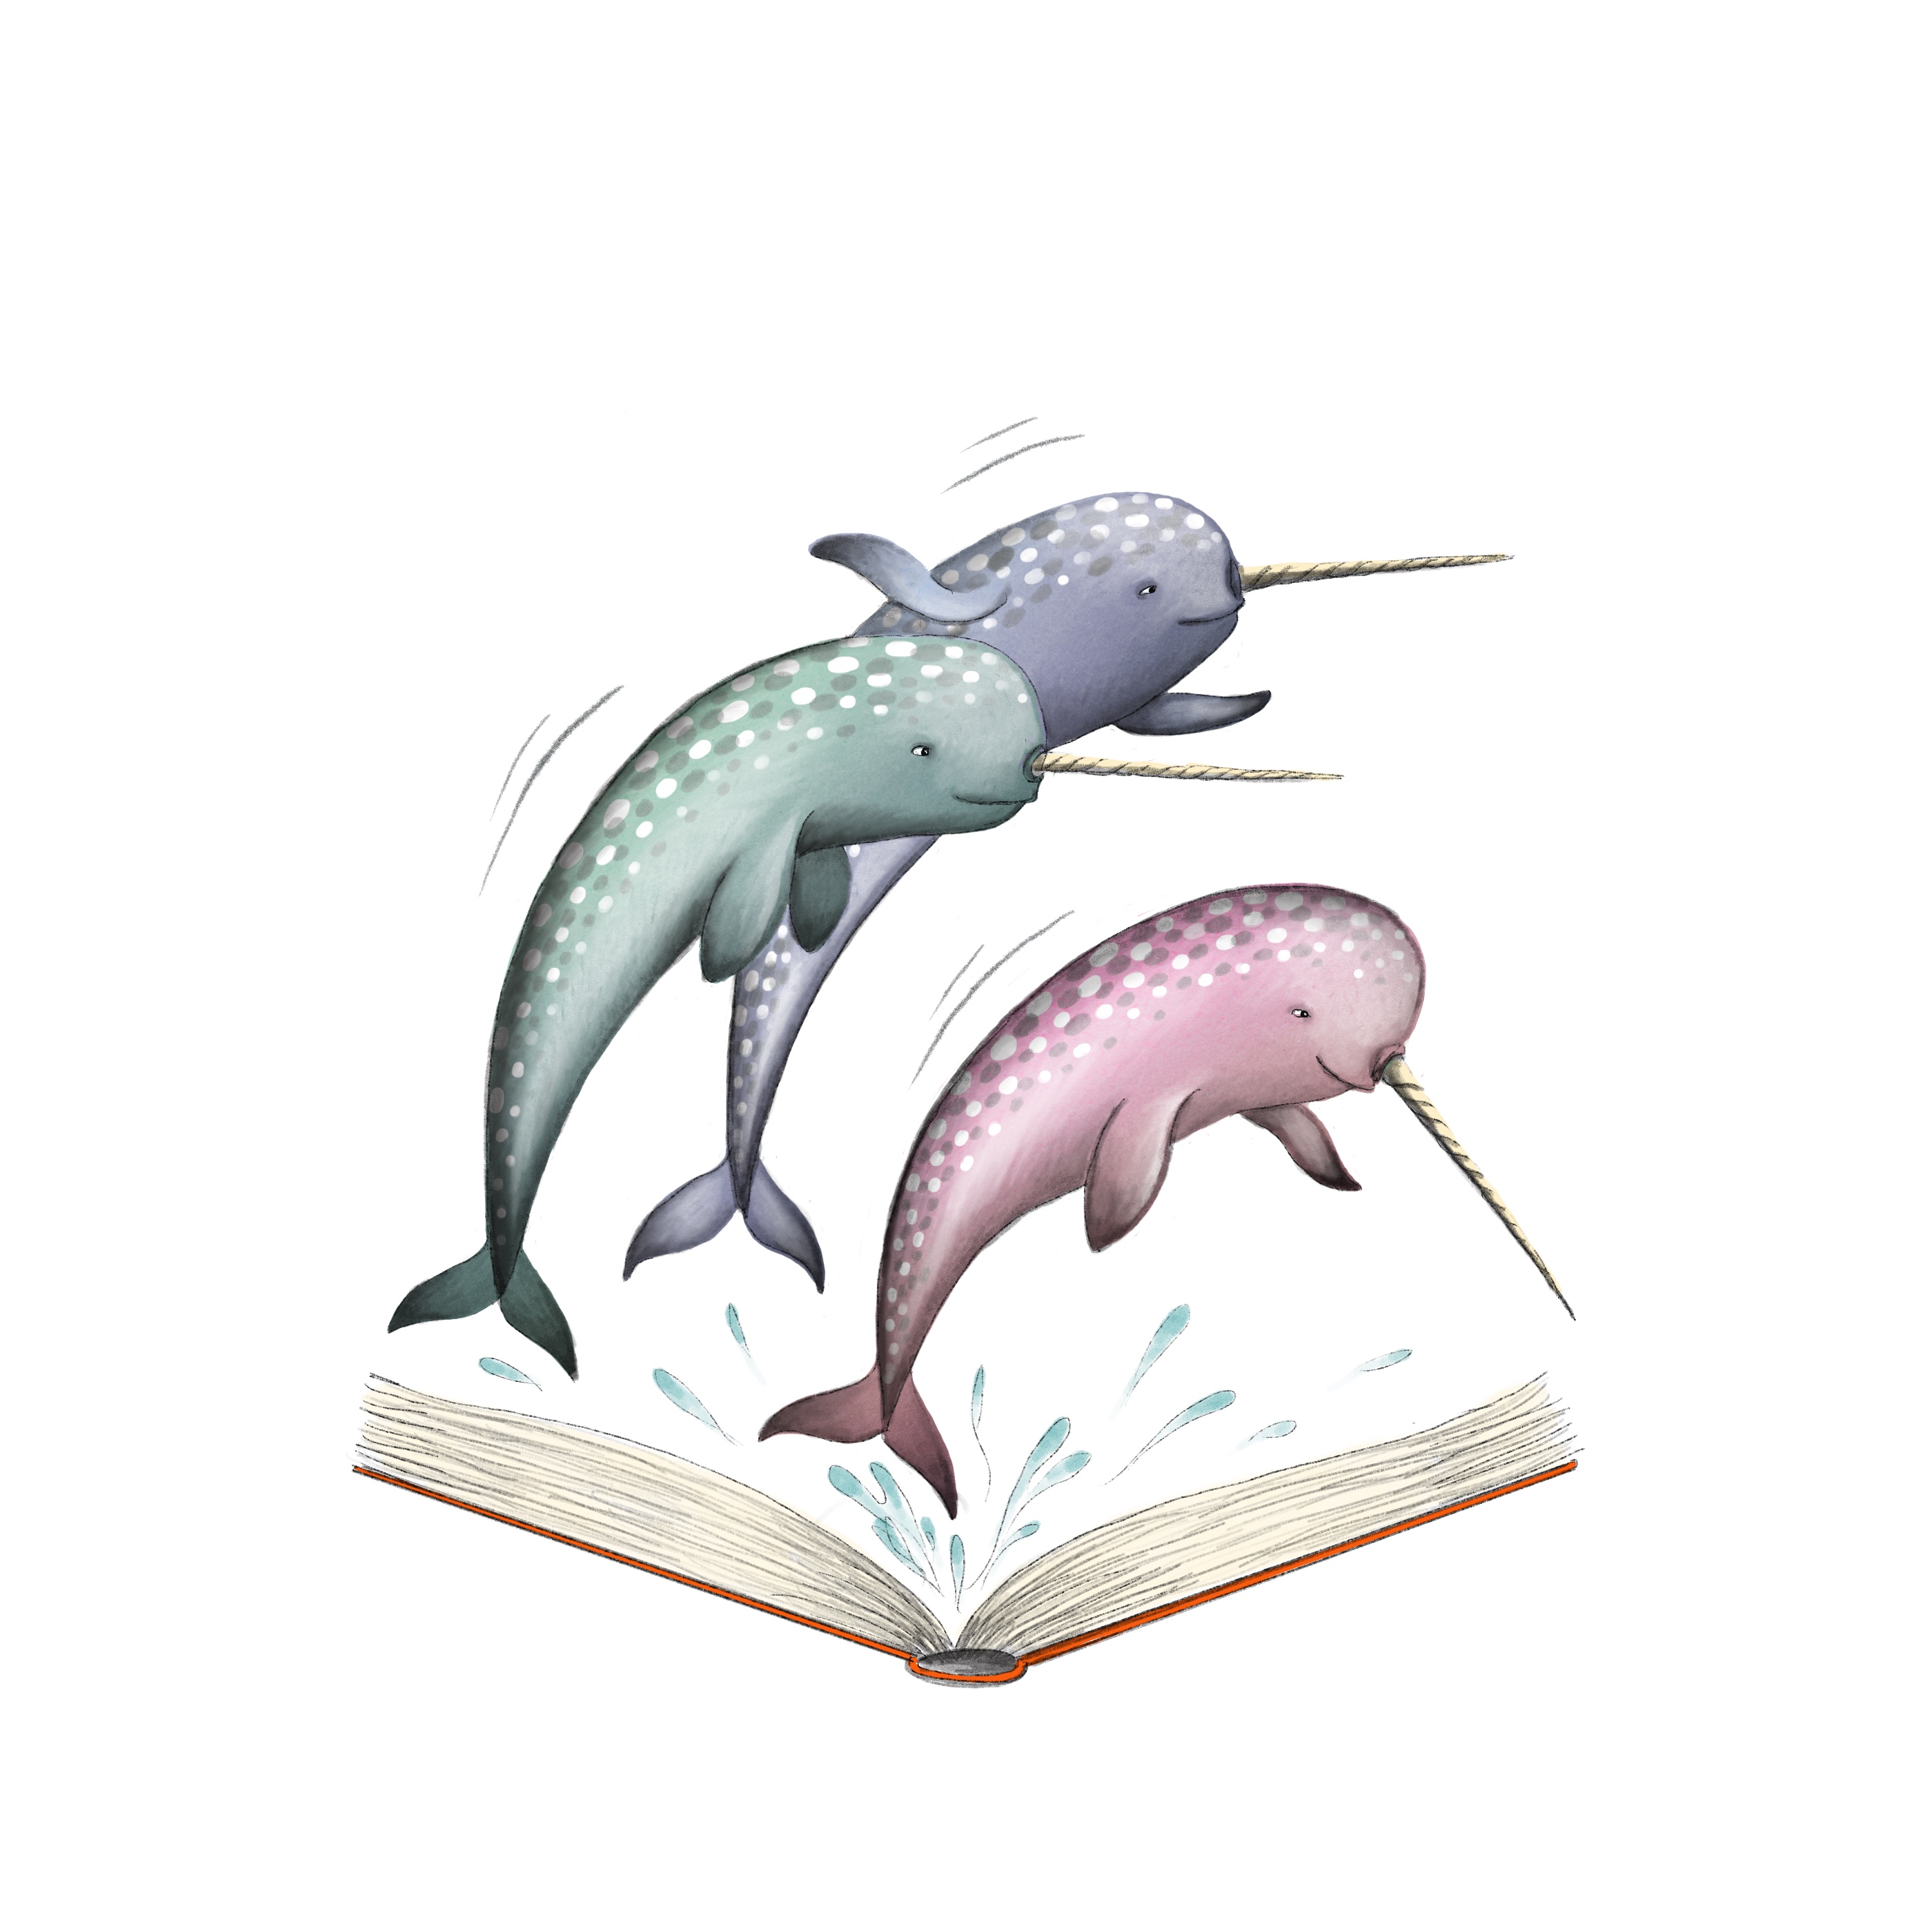 illustrated narwhals jump from storybook pages